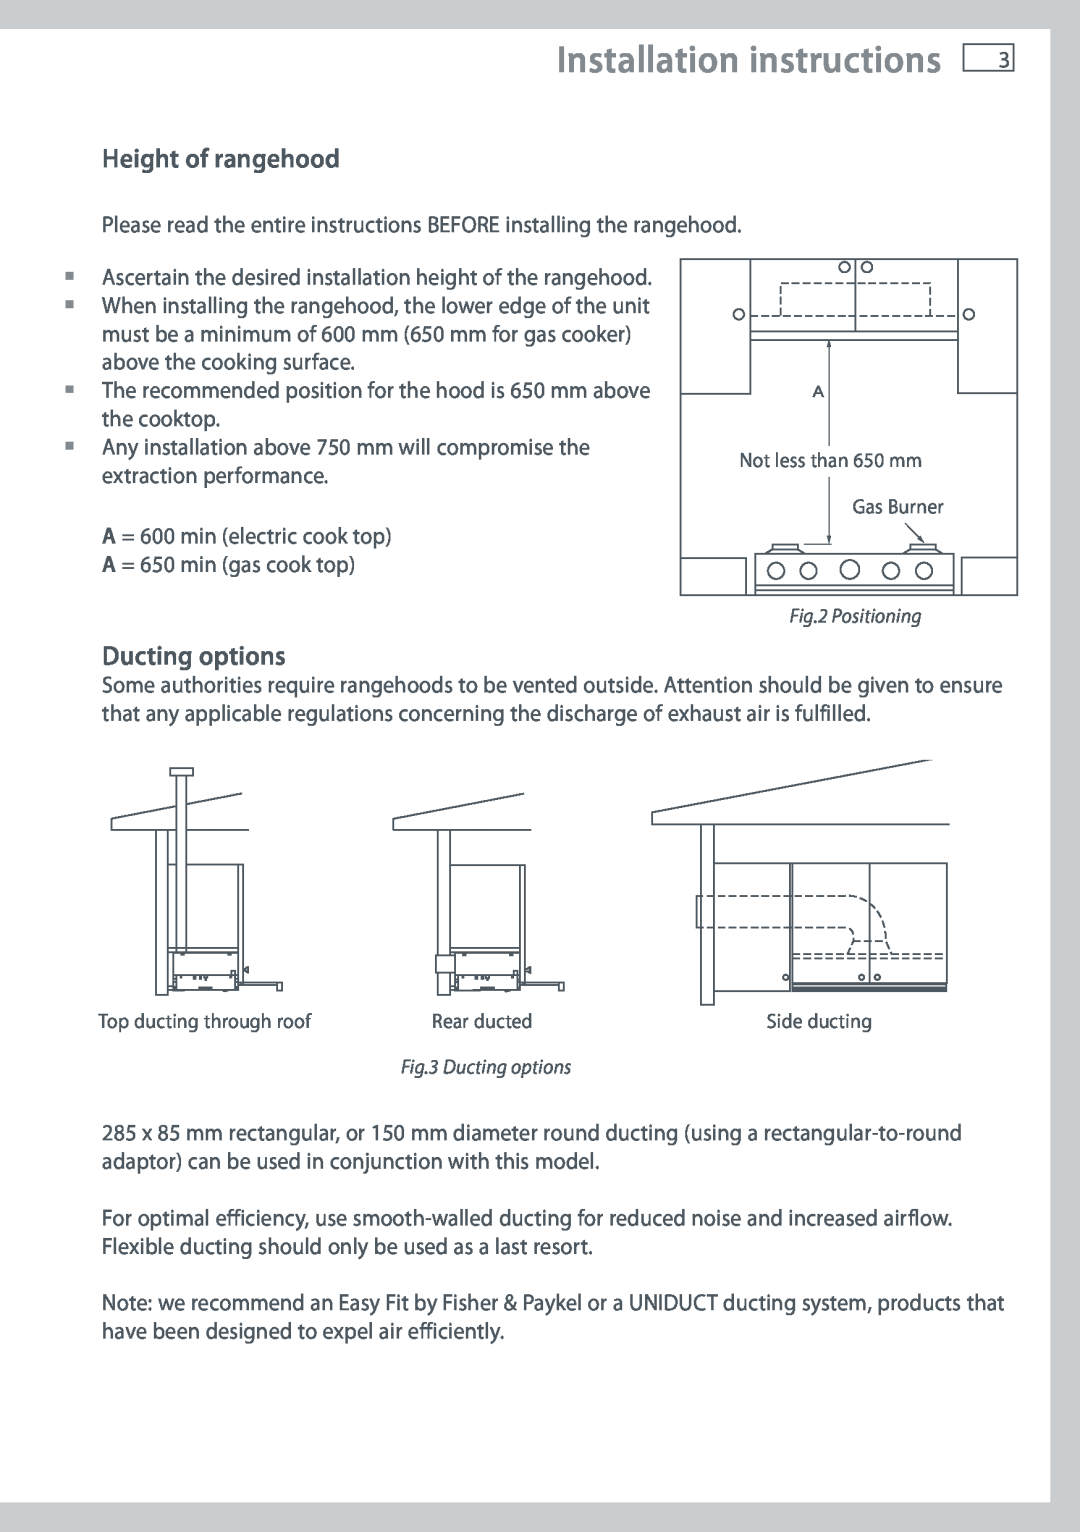 Fisher & Paykel HS90CSX1 installation instructions Height of rangehood, Ducting options, Installation instructions 